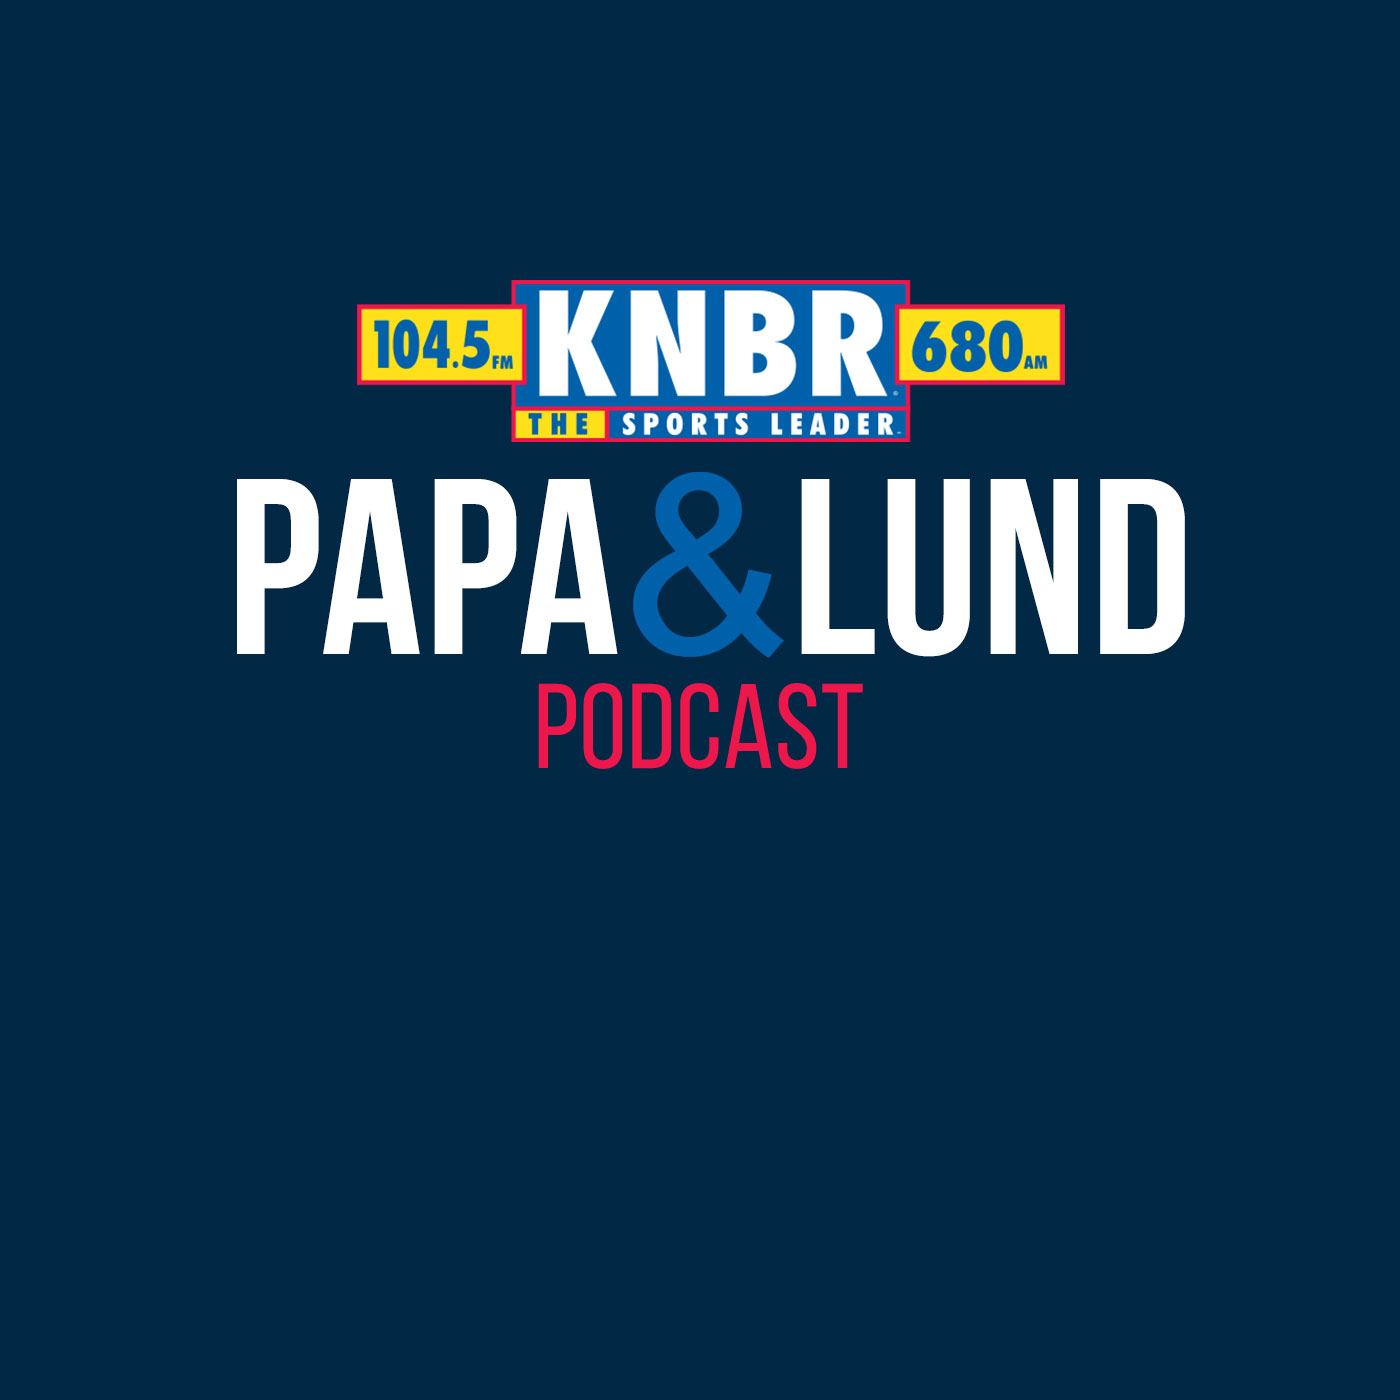 5-22 Susan Slusser joins Papa & Lund to discuss the new energy in the clubhouse with Patrick Bailey and Casey Schmitt making the most of their big league opportunities and how it has changed the outlook of the season moving forward